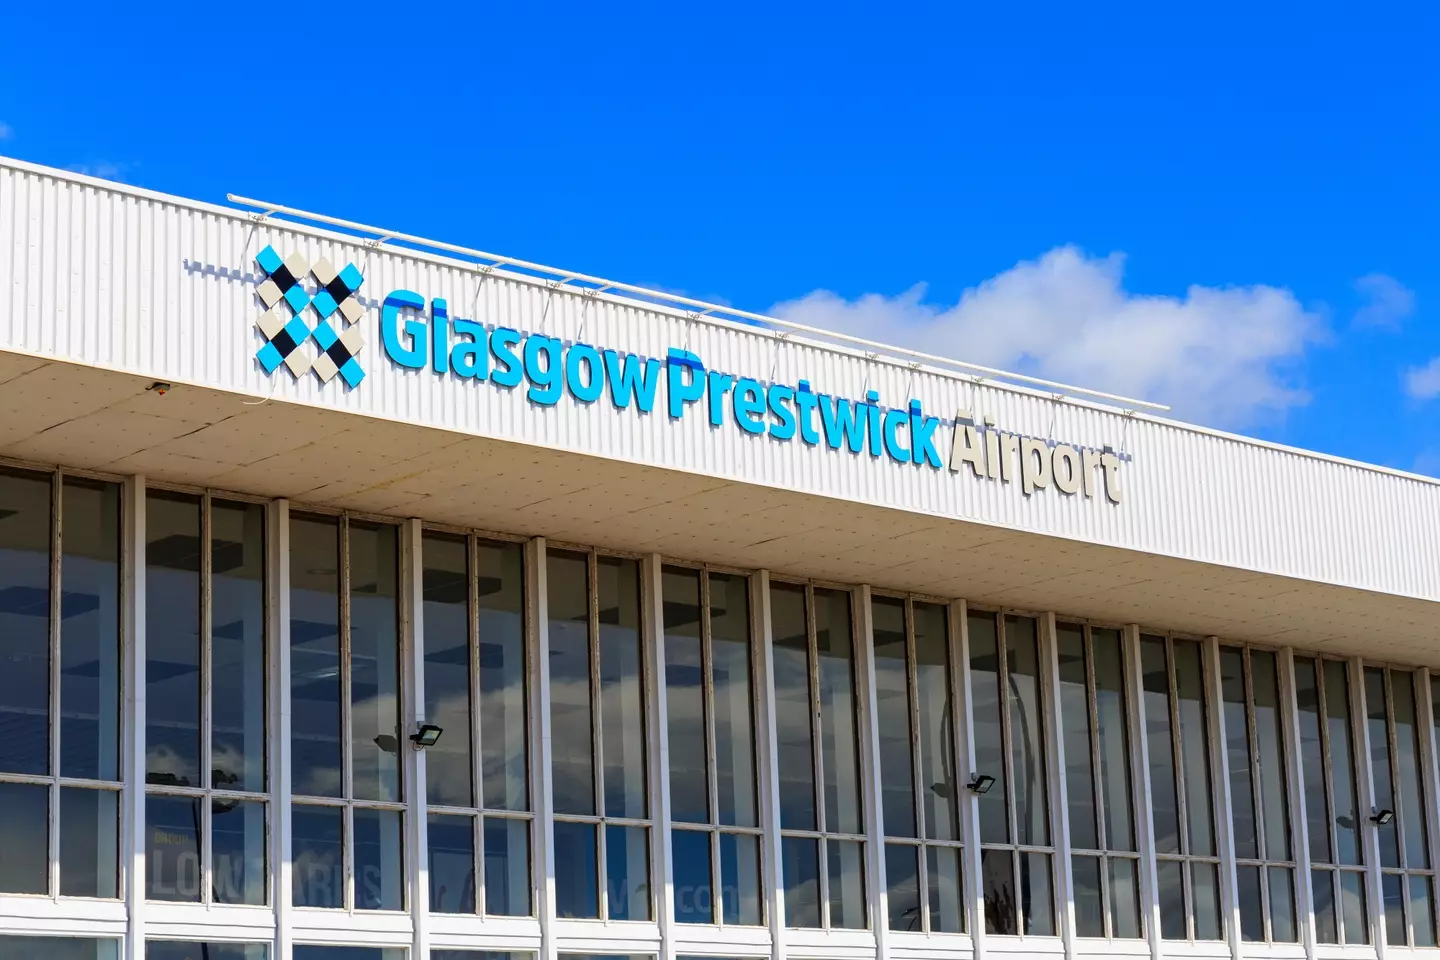 The plane made an emergency landing at Glasgow Prestwick Airport.